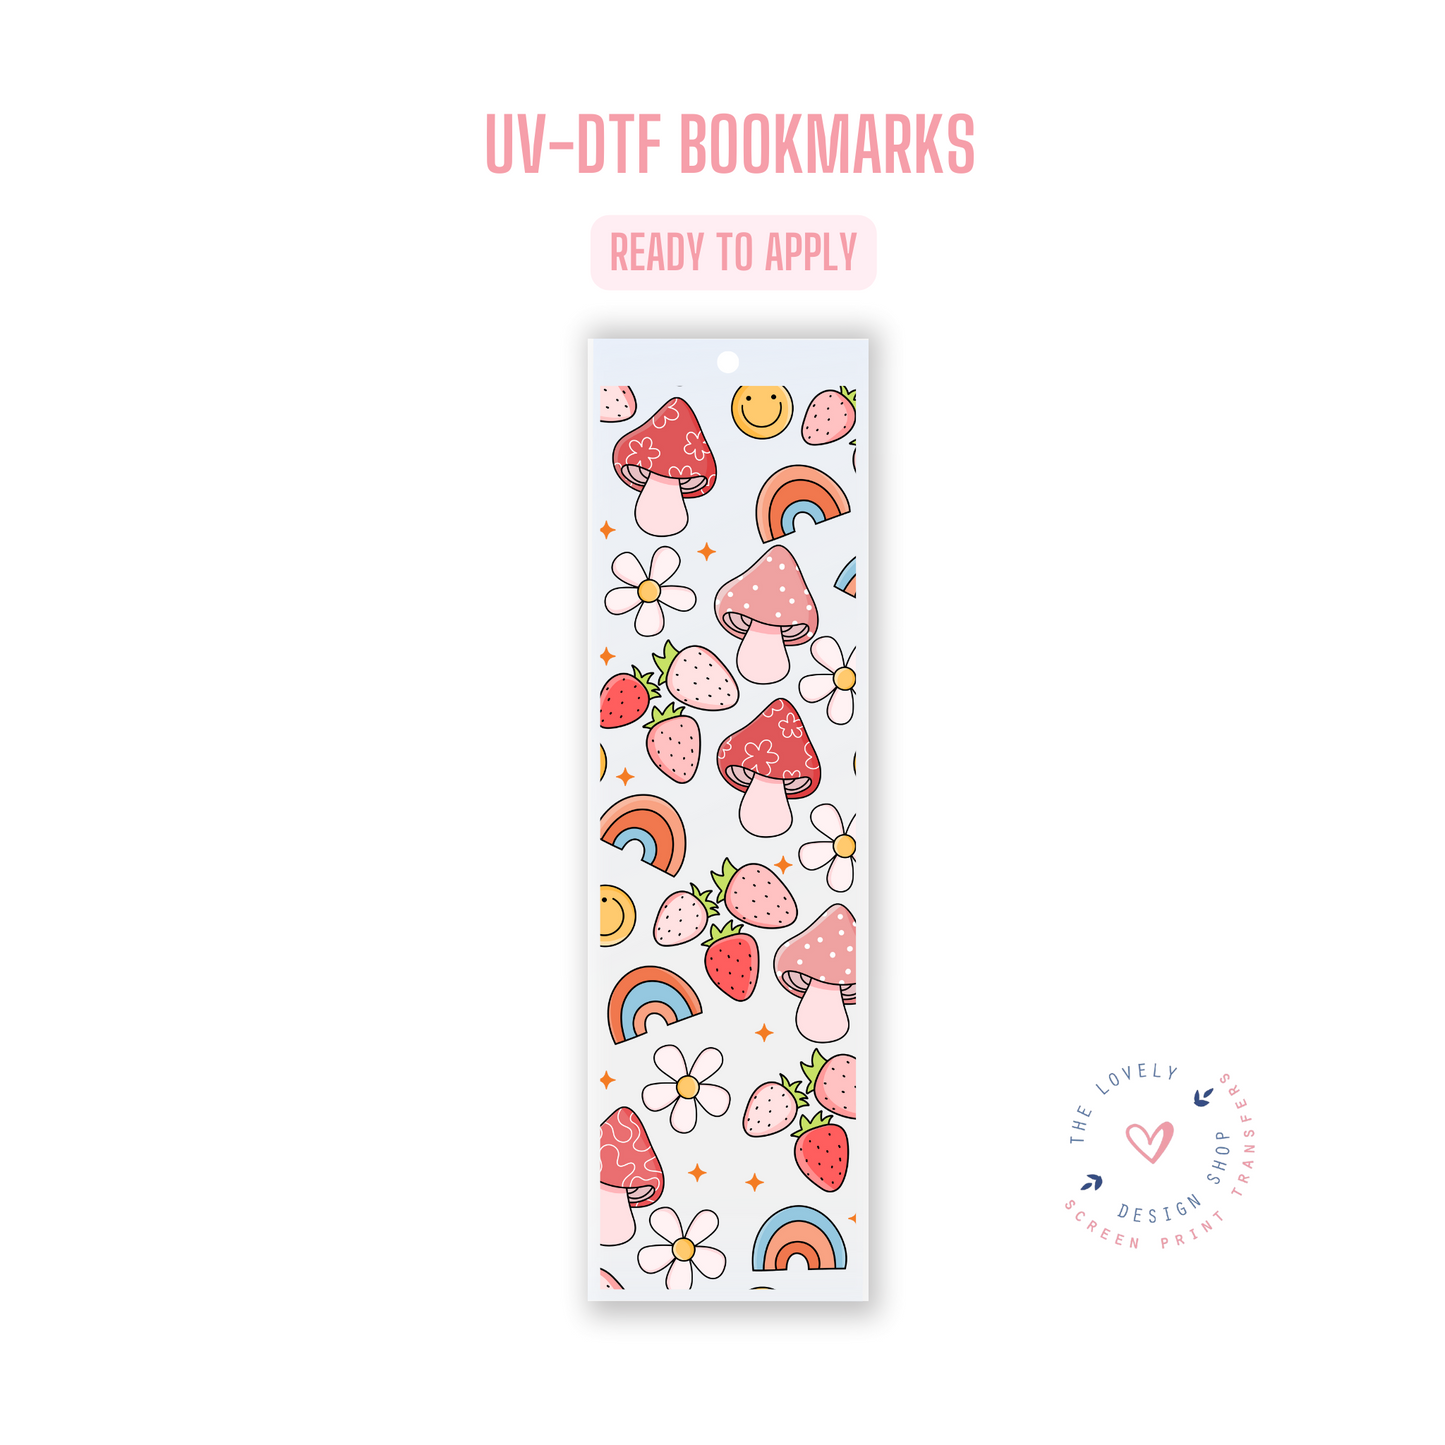 Happy Bookmark - UV DTF Bookmark Decal (Ready to Ship) Apr 1